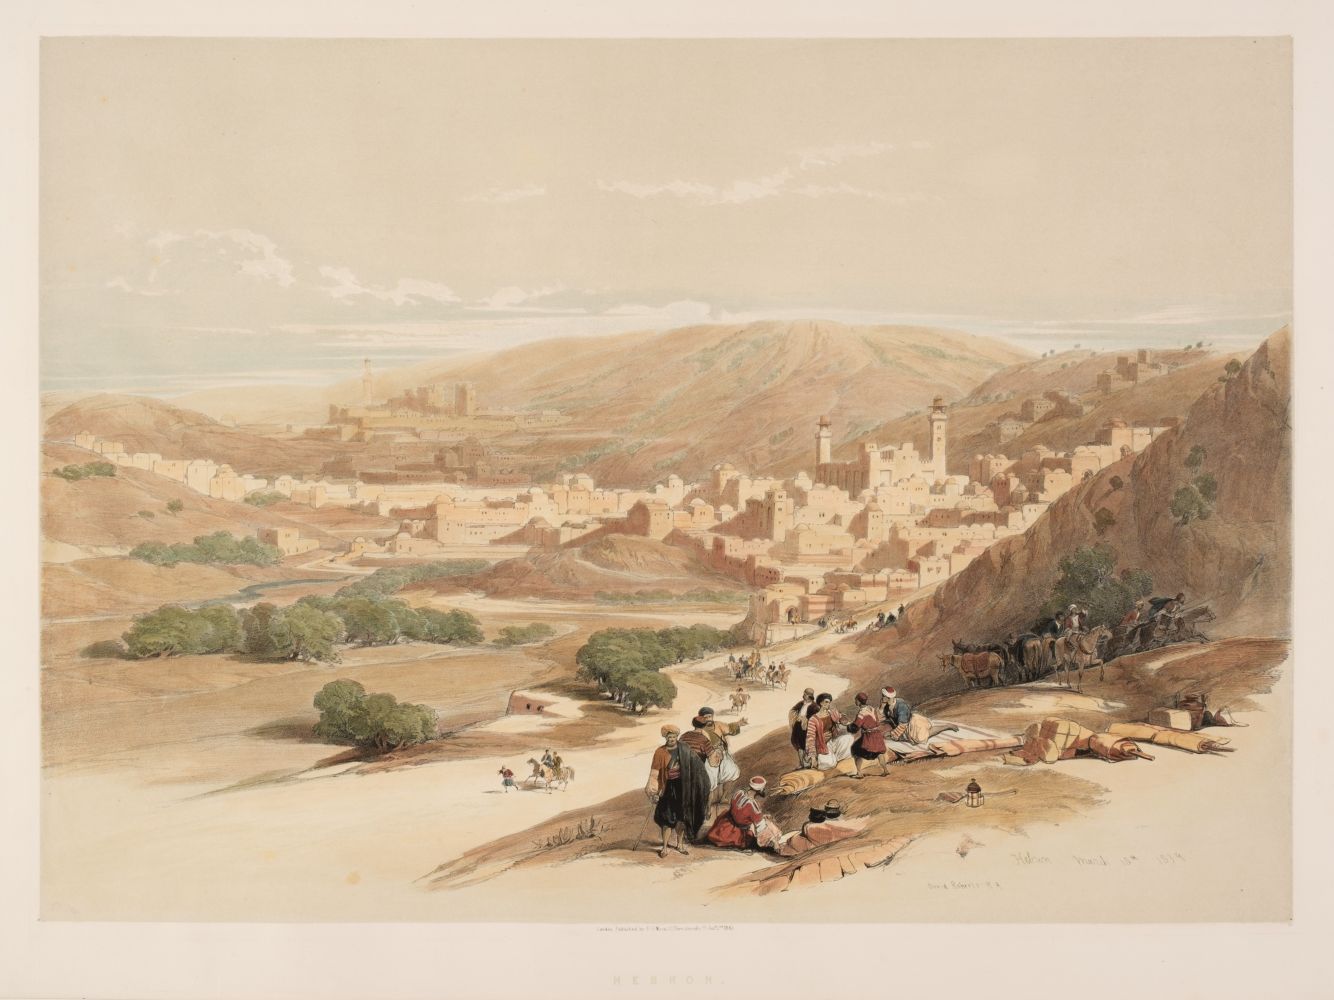 Roberts (David). A collection of 11 views in the Holy Land, circa 1844